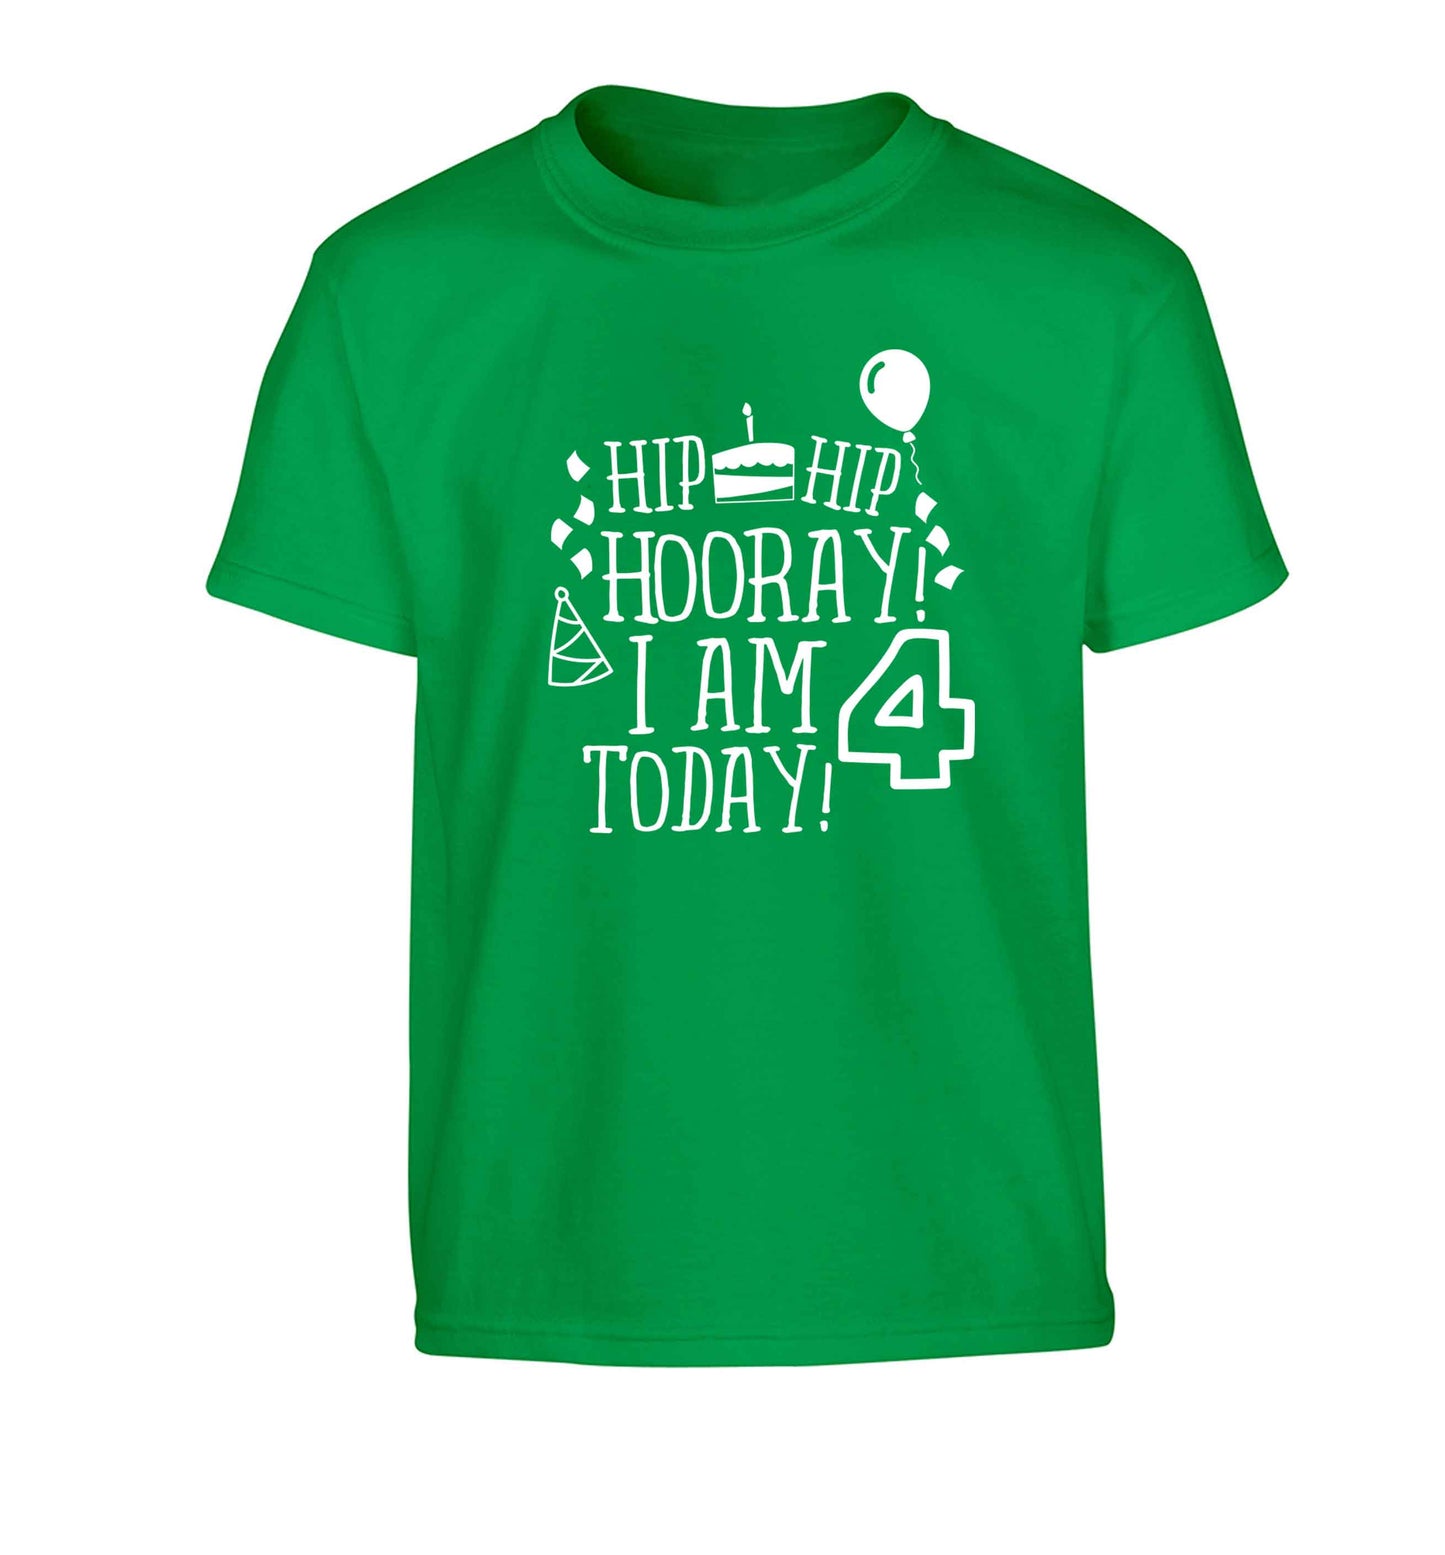 Hip hip hooray I am four today! Children's green Tshirt 12-13 Years